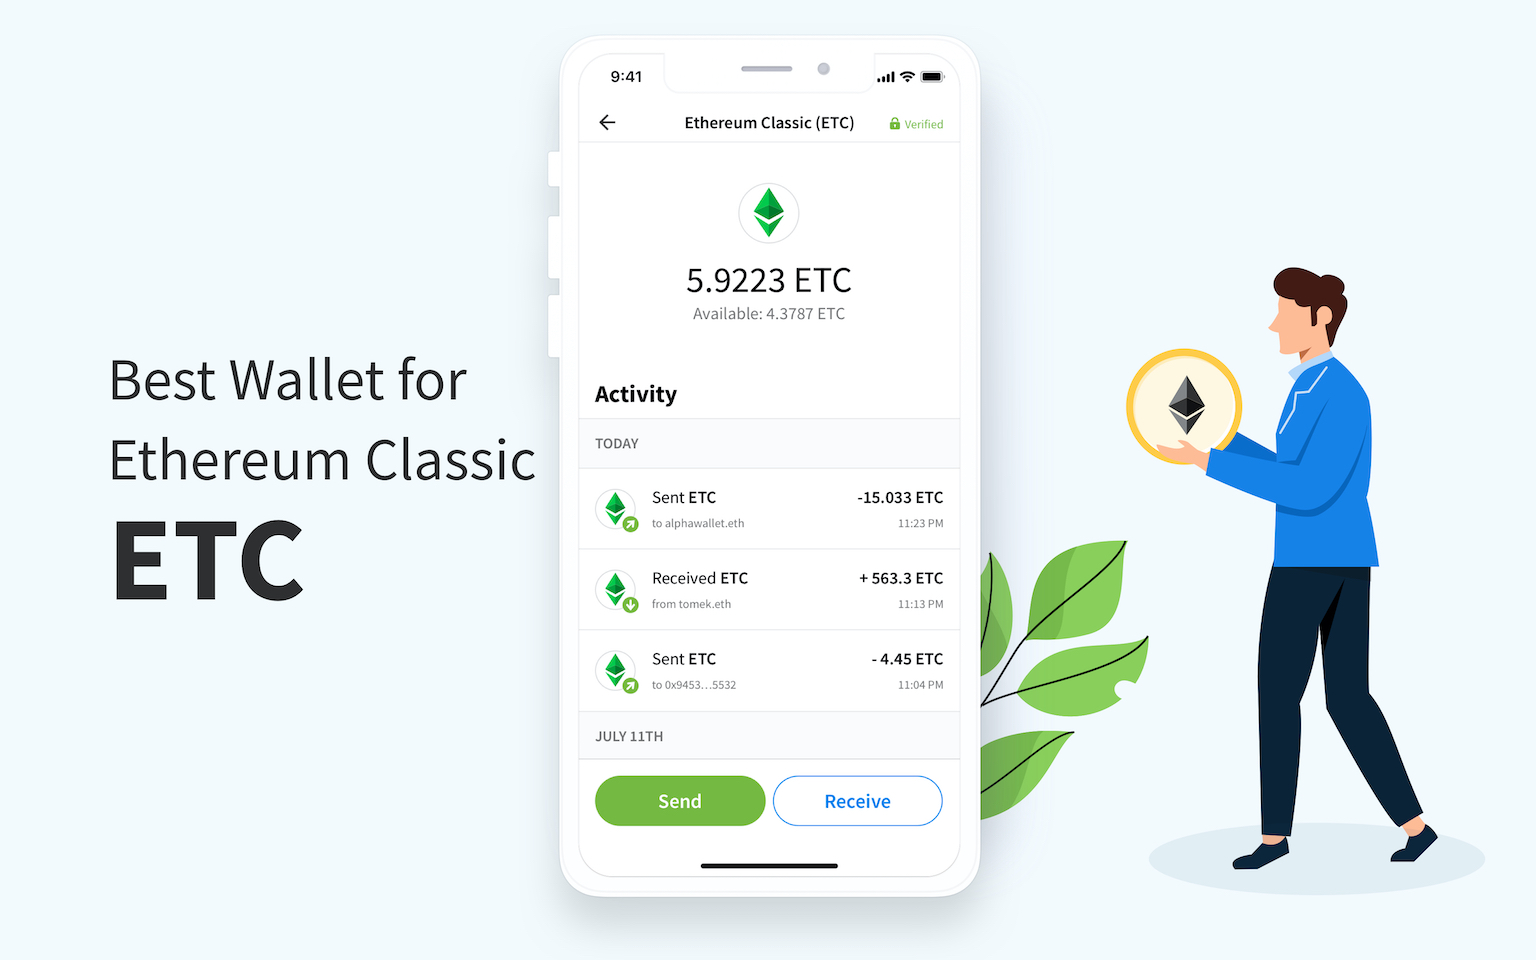 The Best Wallet for Ethereum Classic ETC